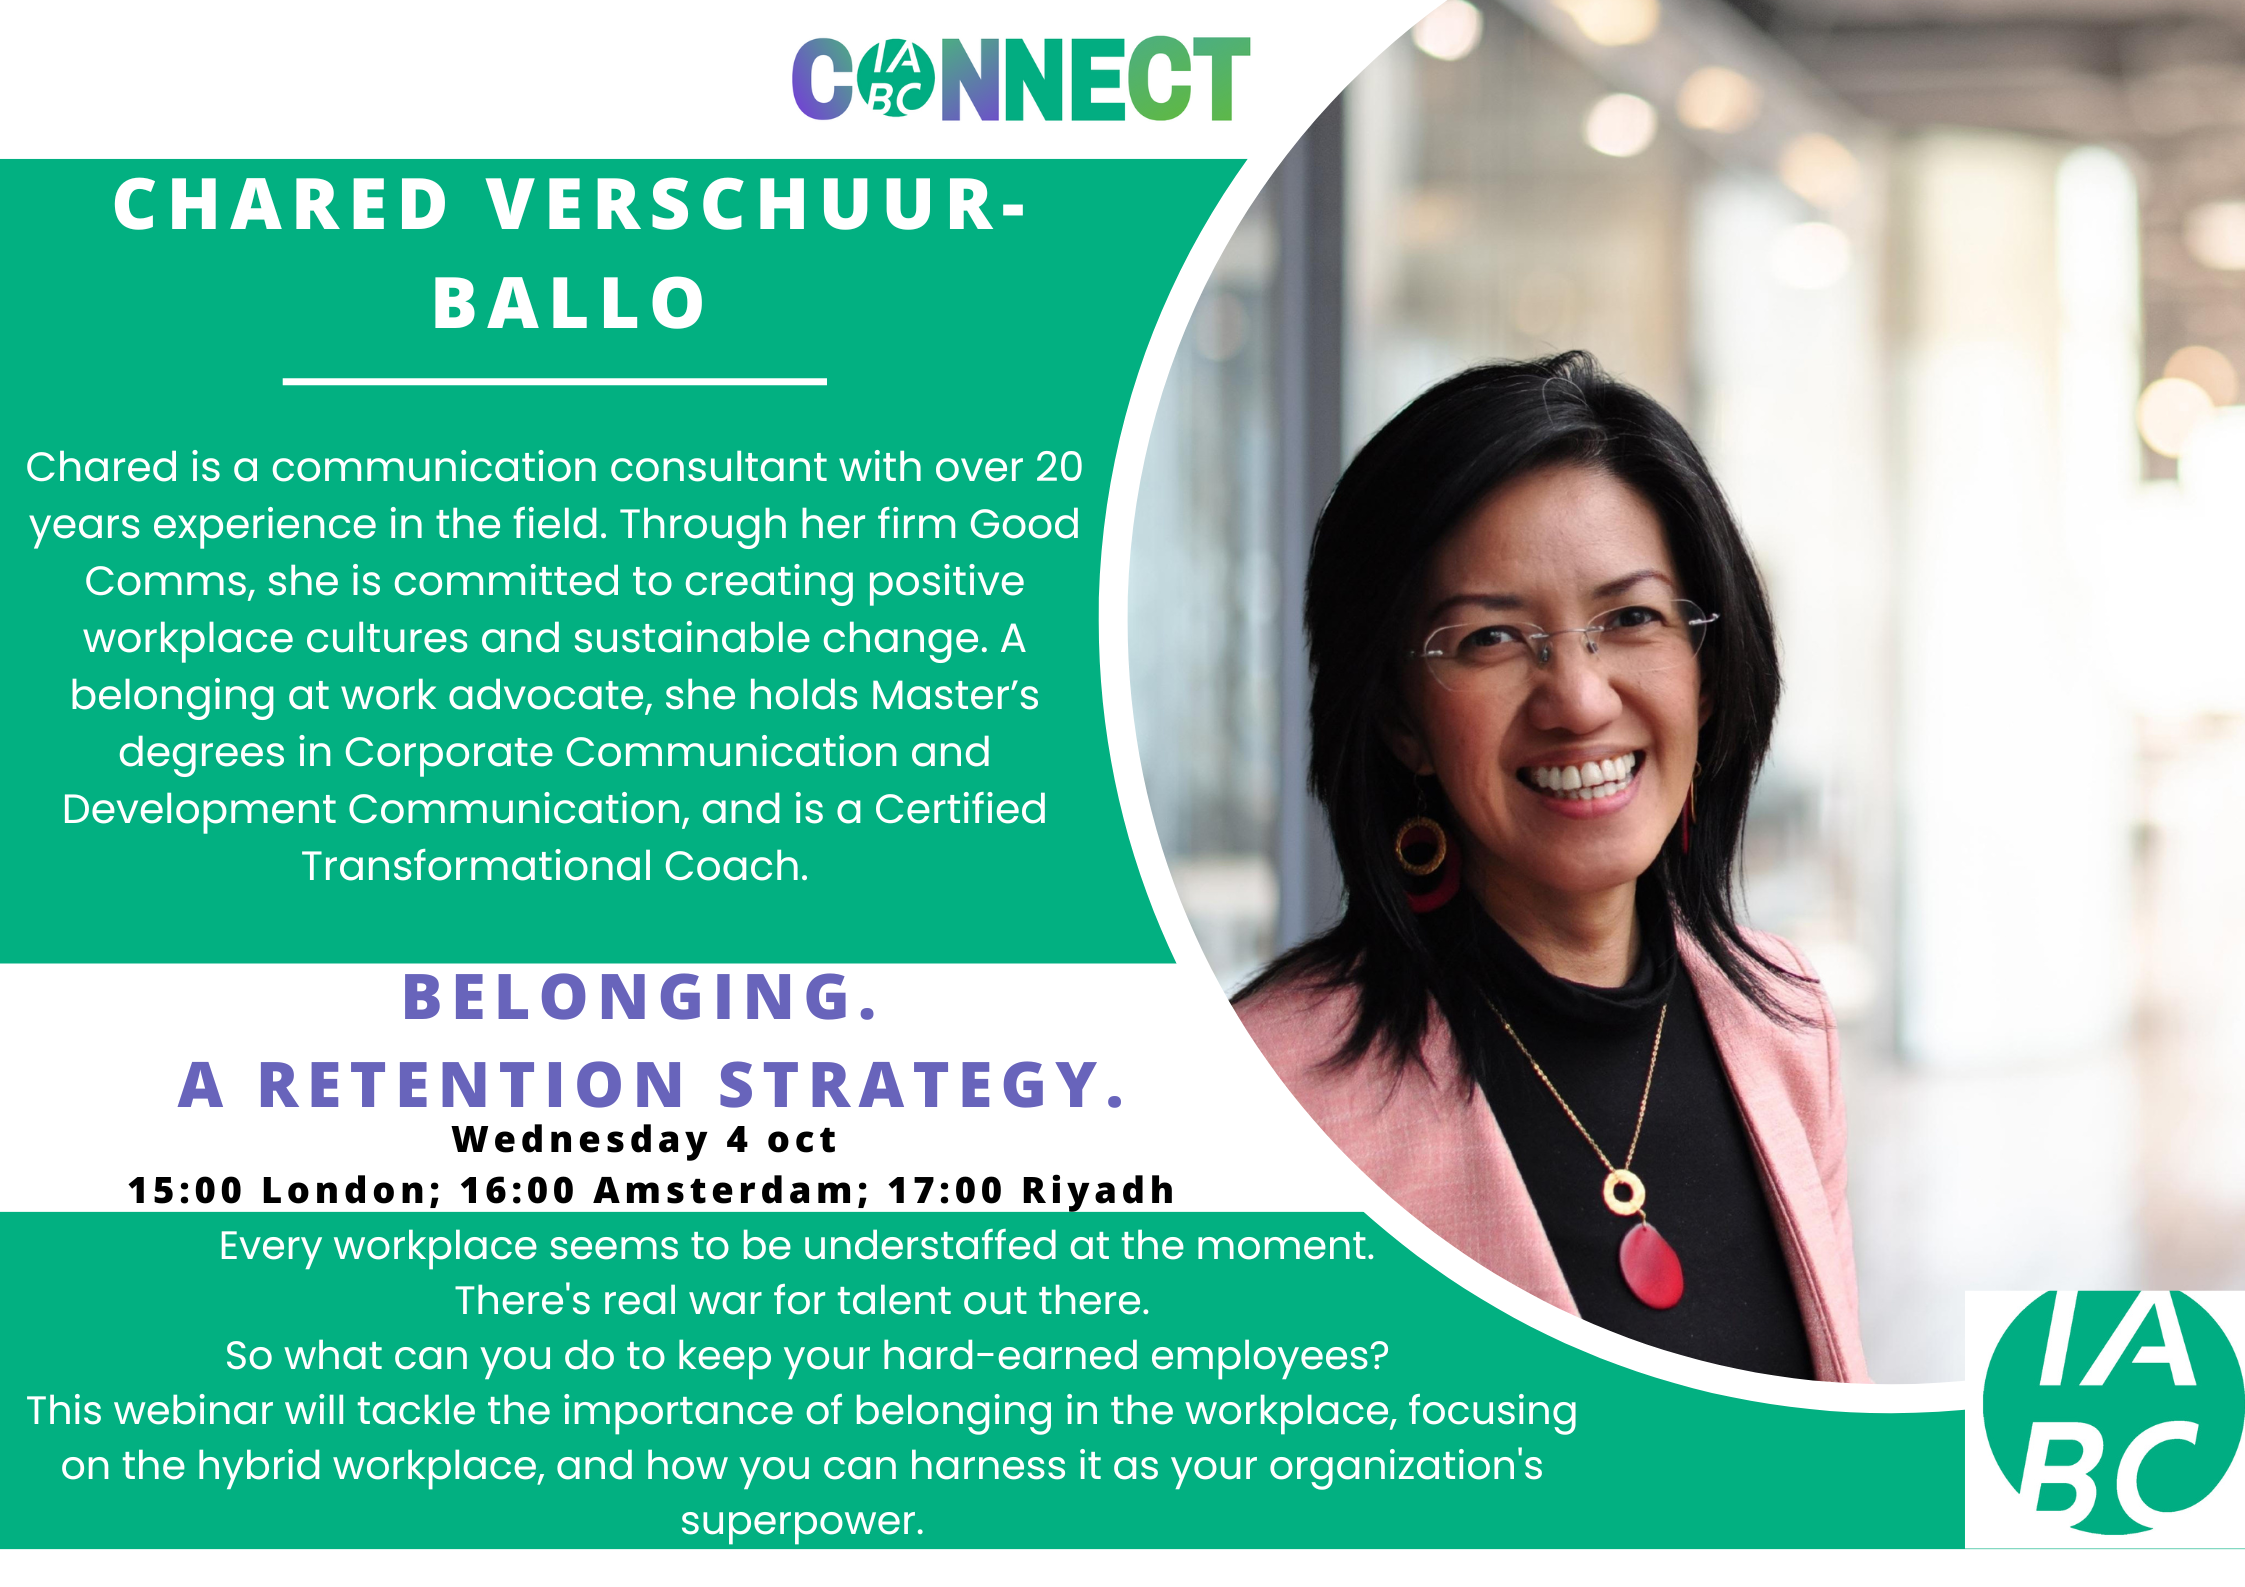 Details of the IABC connect event hosted by Chared Verschurr-Ballo